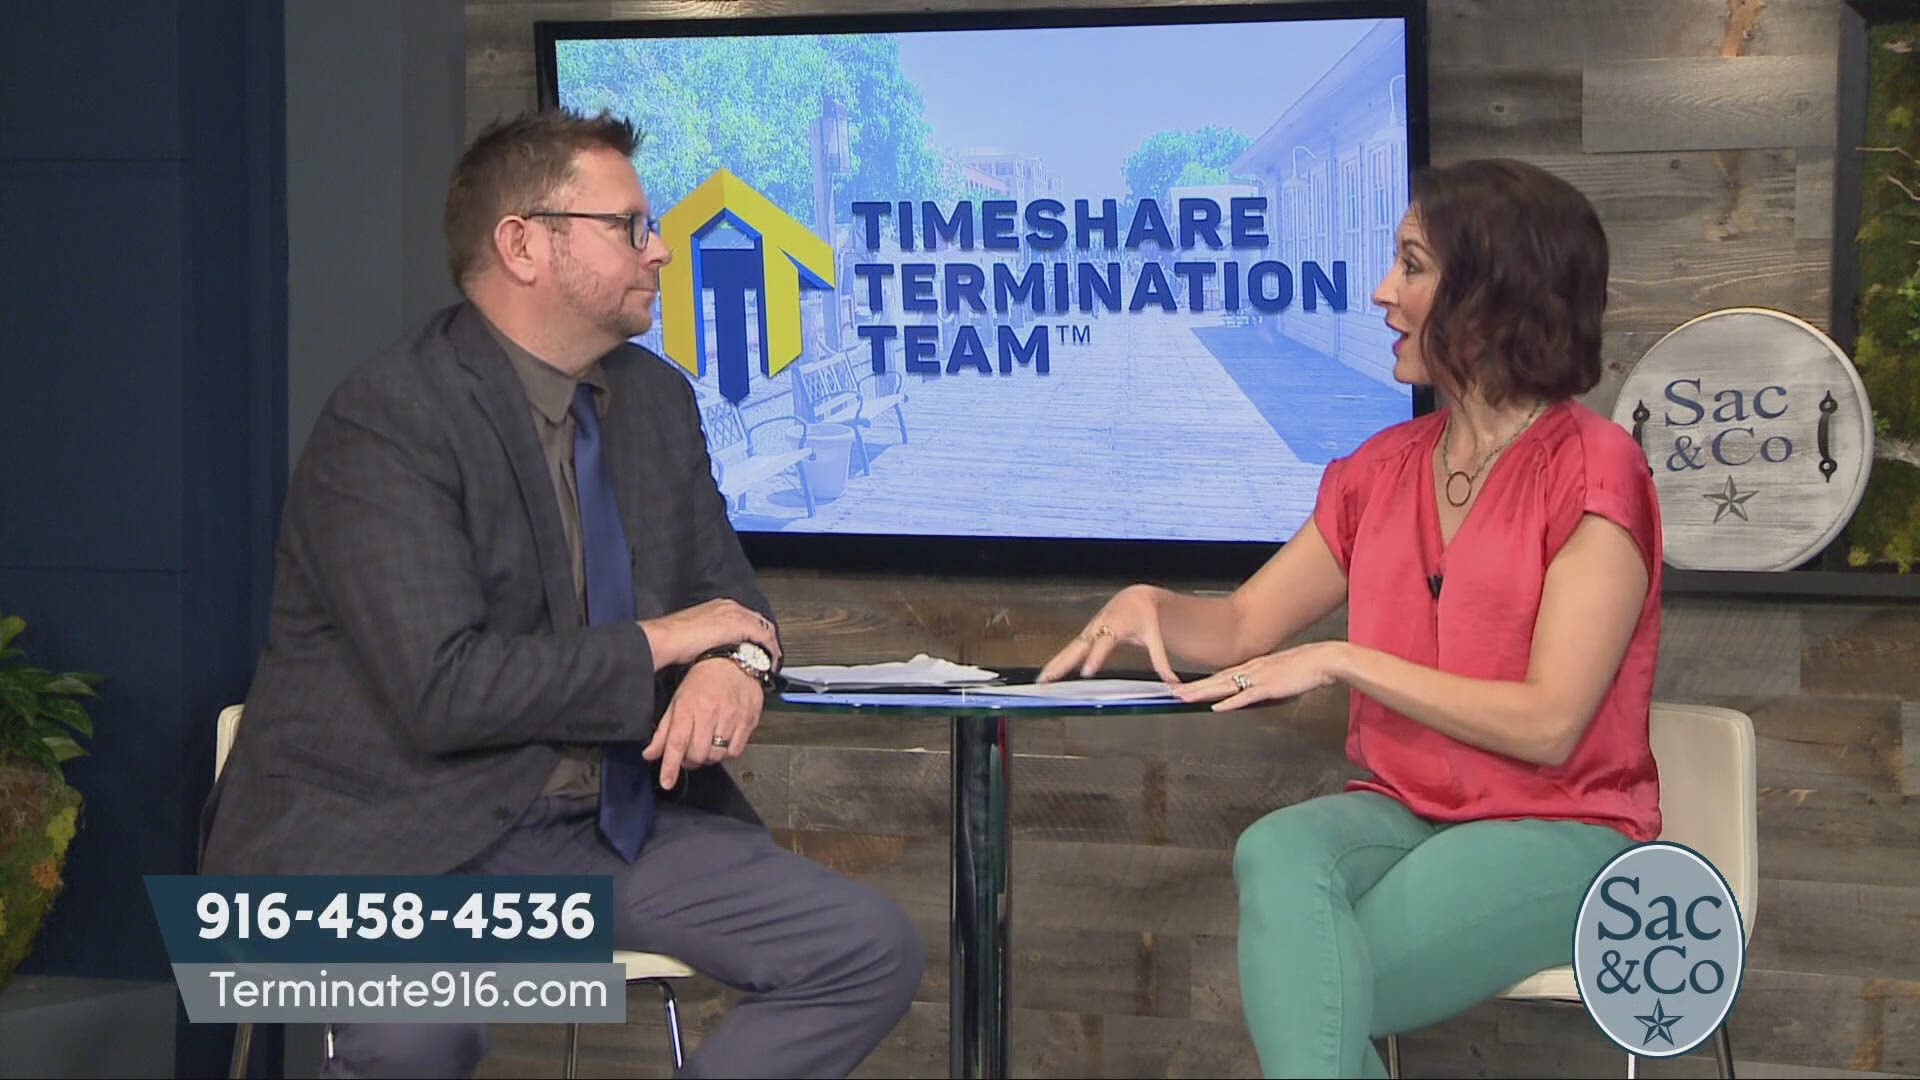 Are you a timeshare owner with little to no extra time to book a trip and looking for information on how to terminate it? We’ve got the details! The following is a paid segment sponsored by Timeshare Termination.